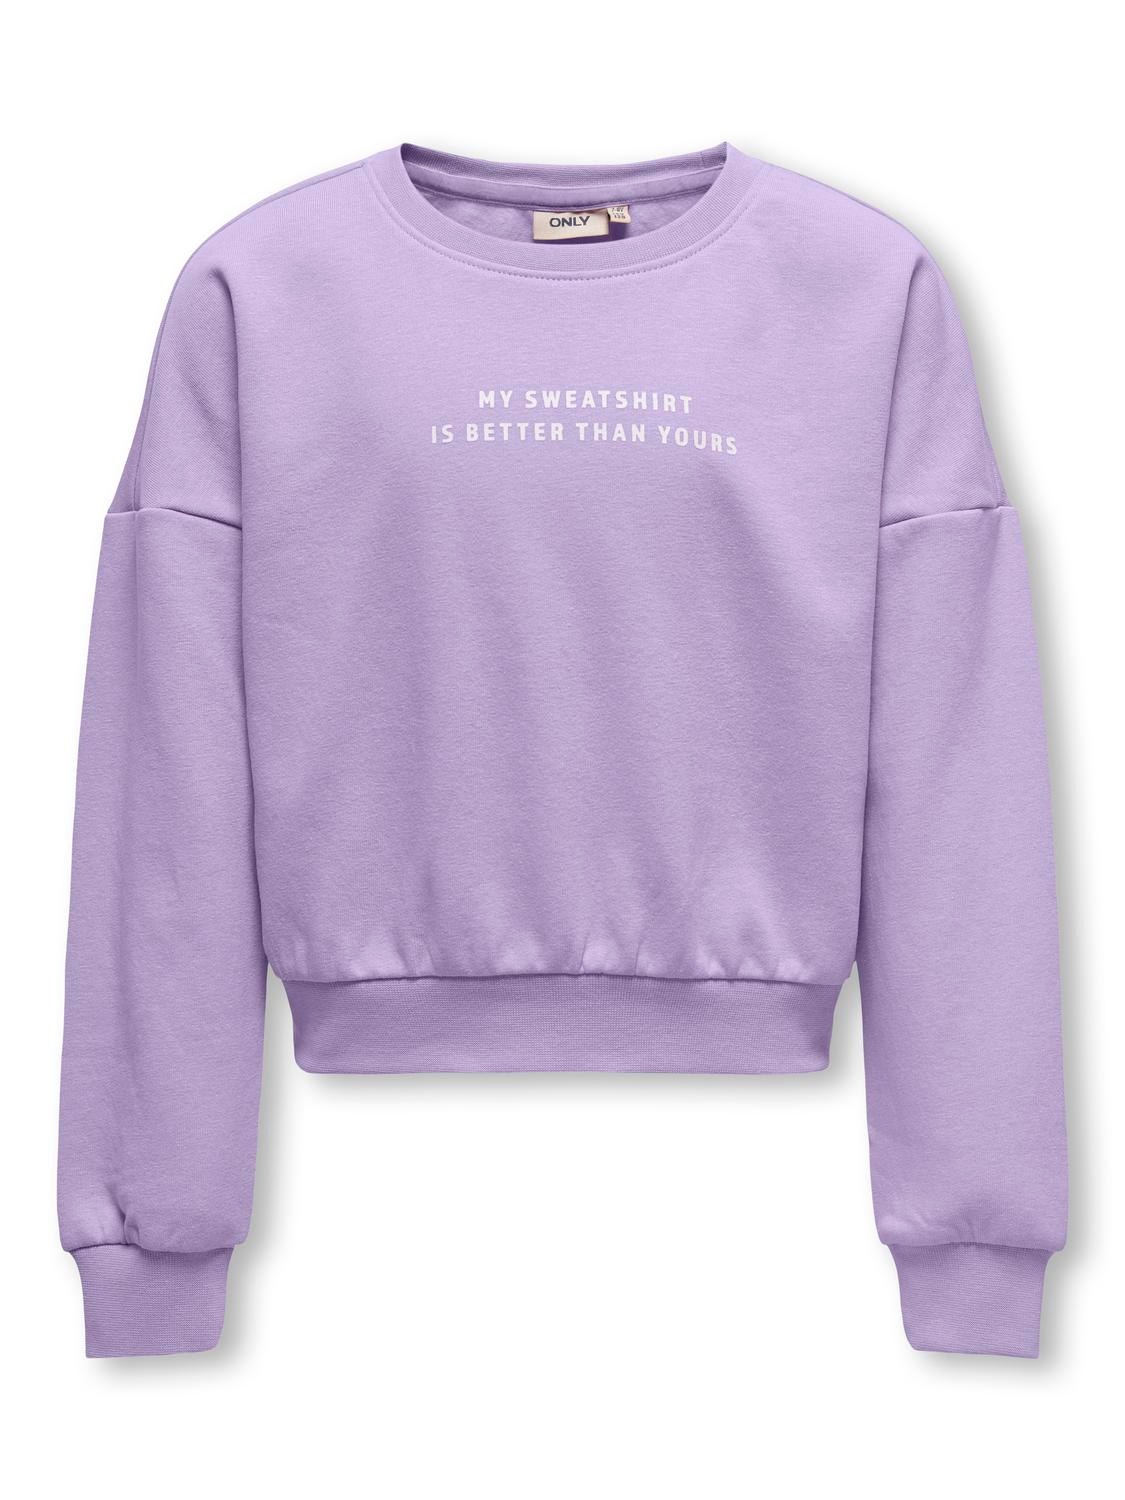 ONLY Regular Fit Round Neck Dropped shoulders Sweatshirts -Purple Rose - 15246790